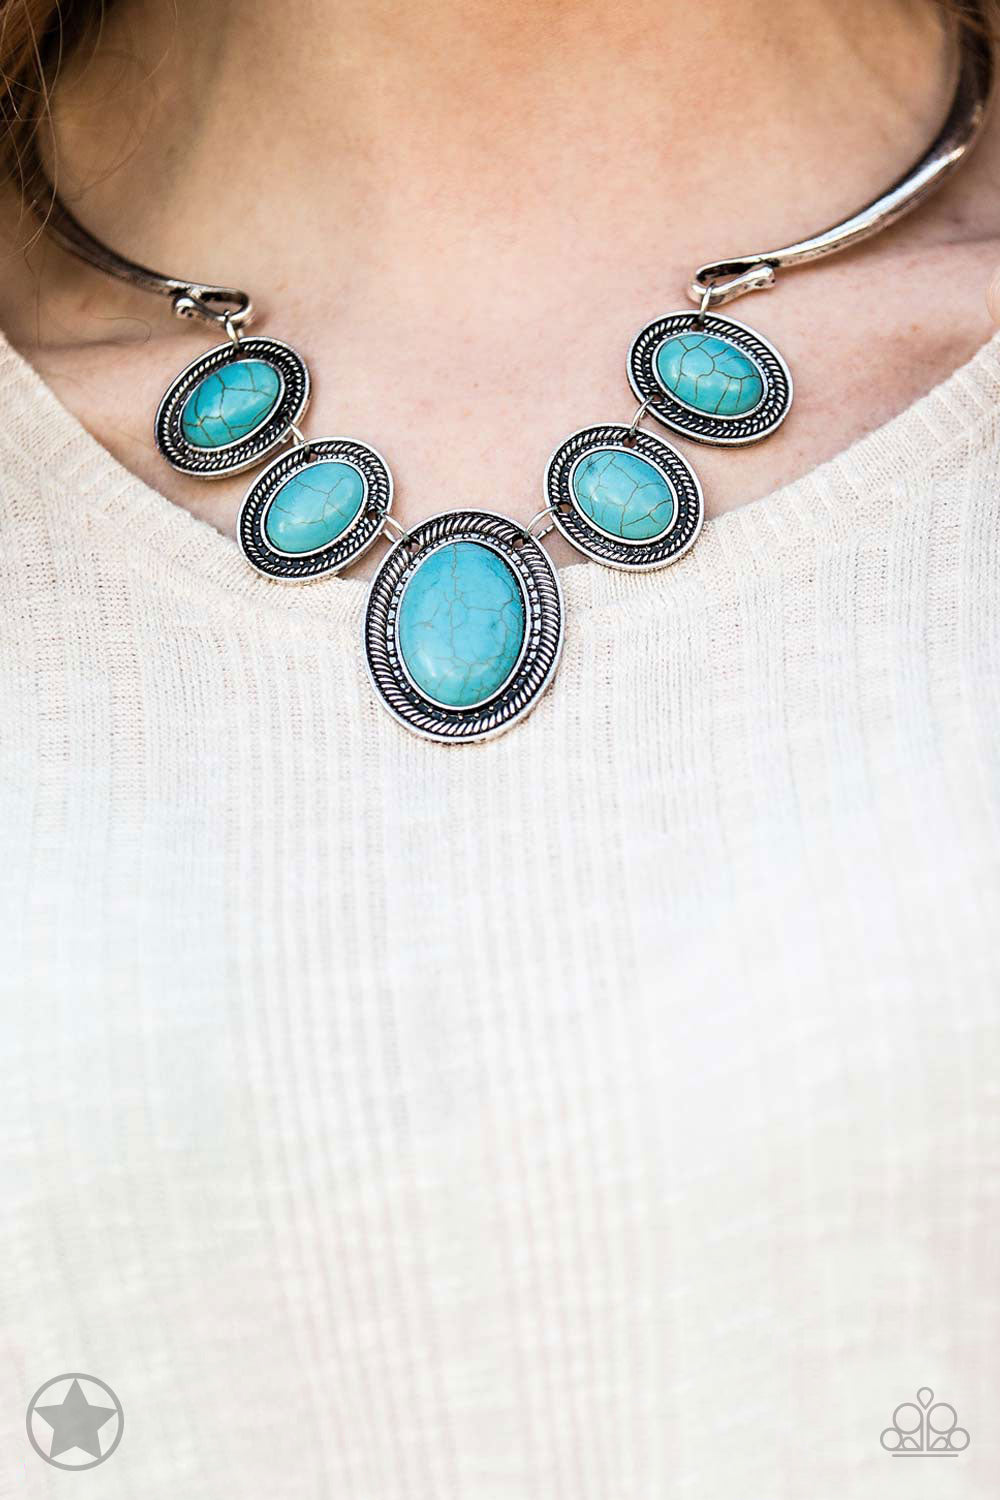 Paparazzi Accessories - River Ride - Blue and Silver Necklace